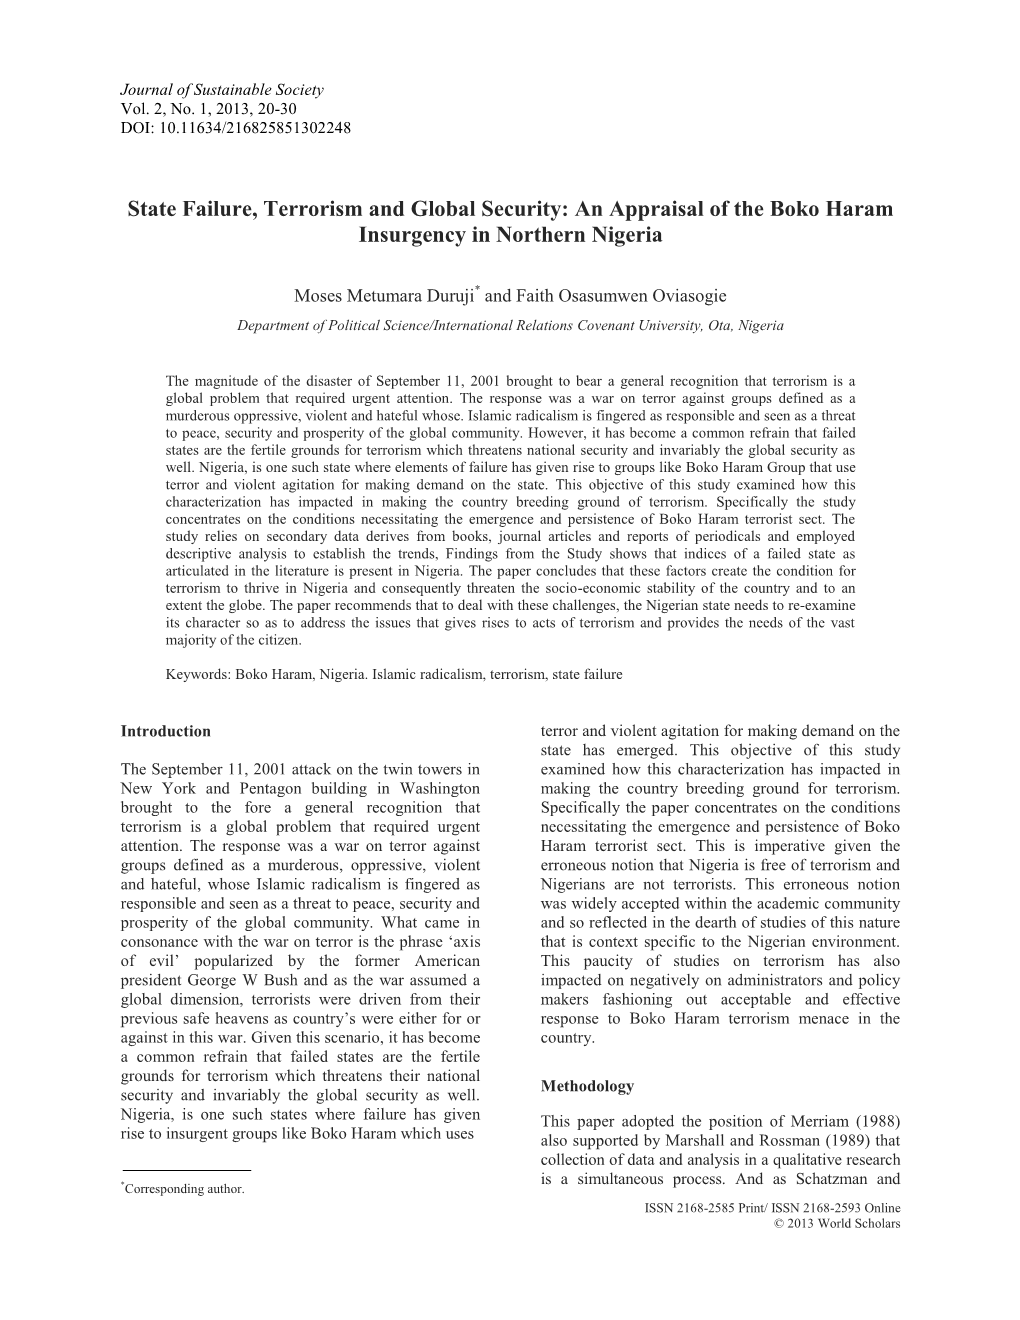 State Failure, Terrorism and Global Security: an Appraisal of the Boko Haram Insurgency in Northern Nigeria